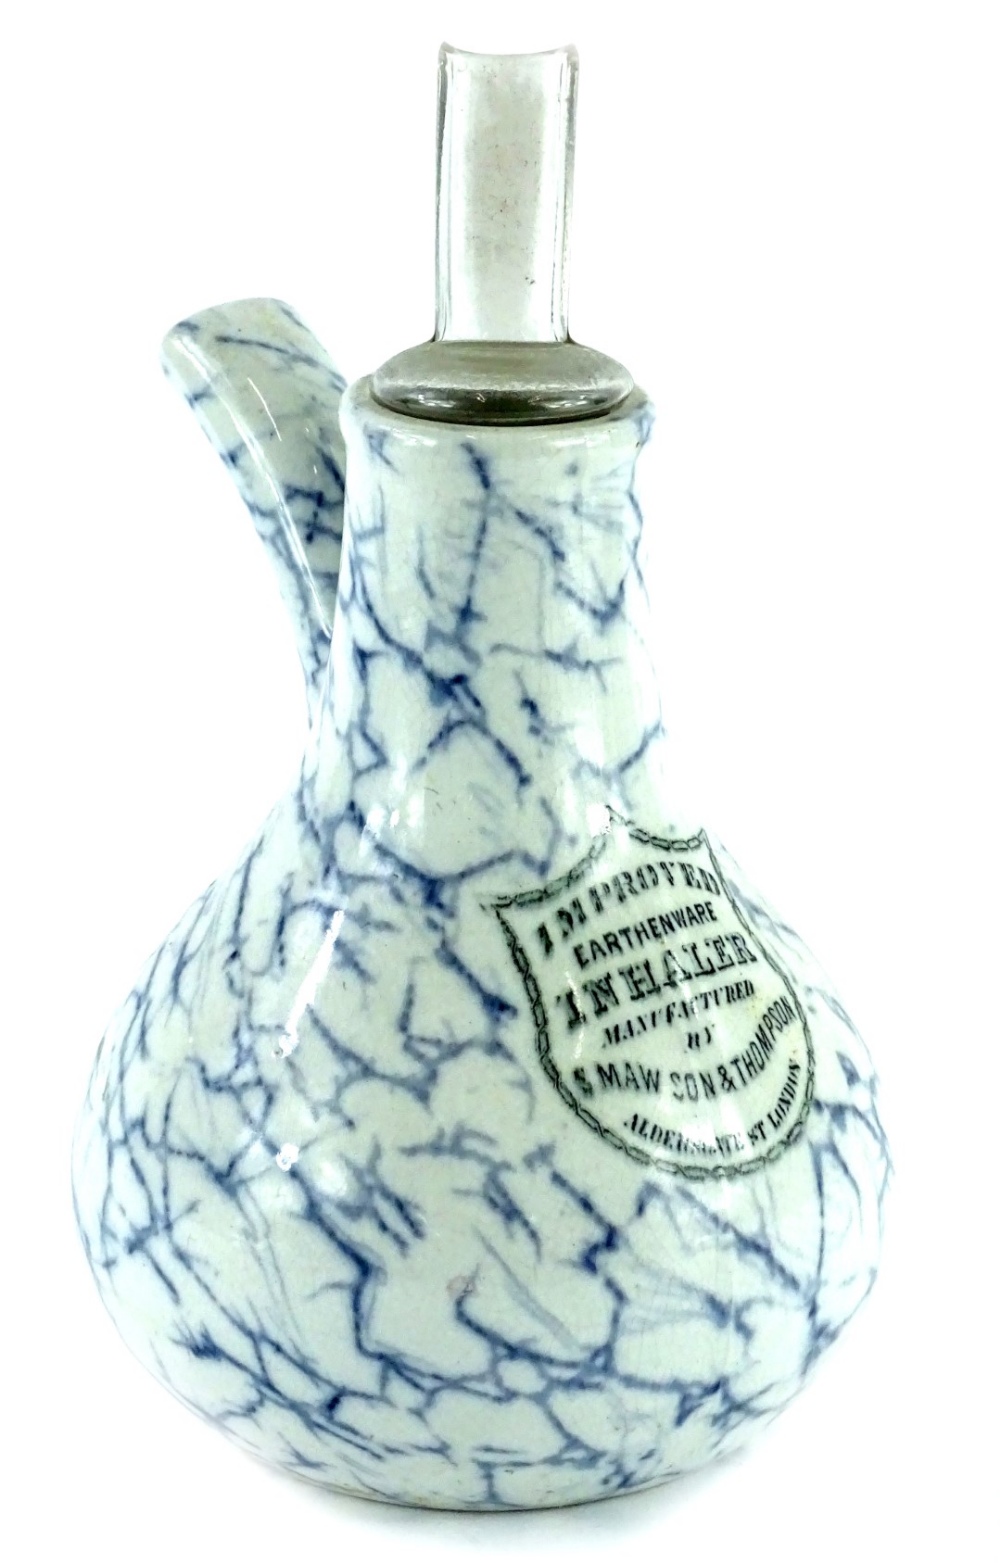 A S. Mawson & Thompson improved pottery inhaler, with marbled decoration and glass mount, 27cm H